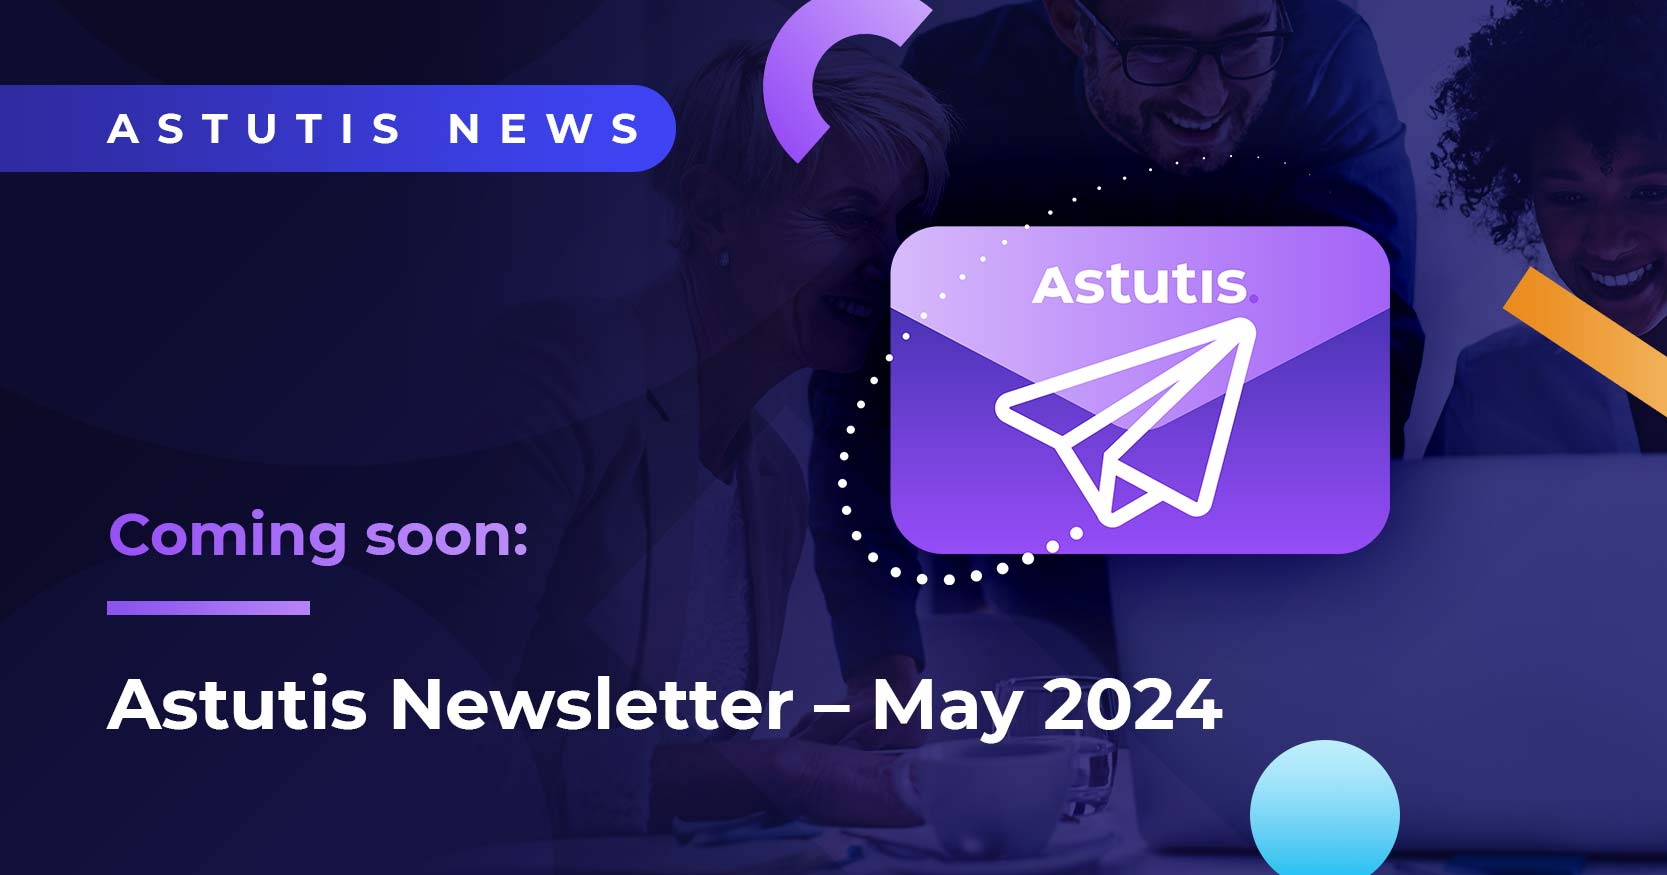 Coming Soon: Asutis Newsletter - May 2024